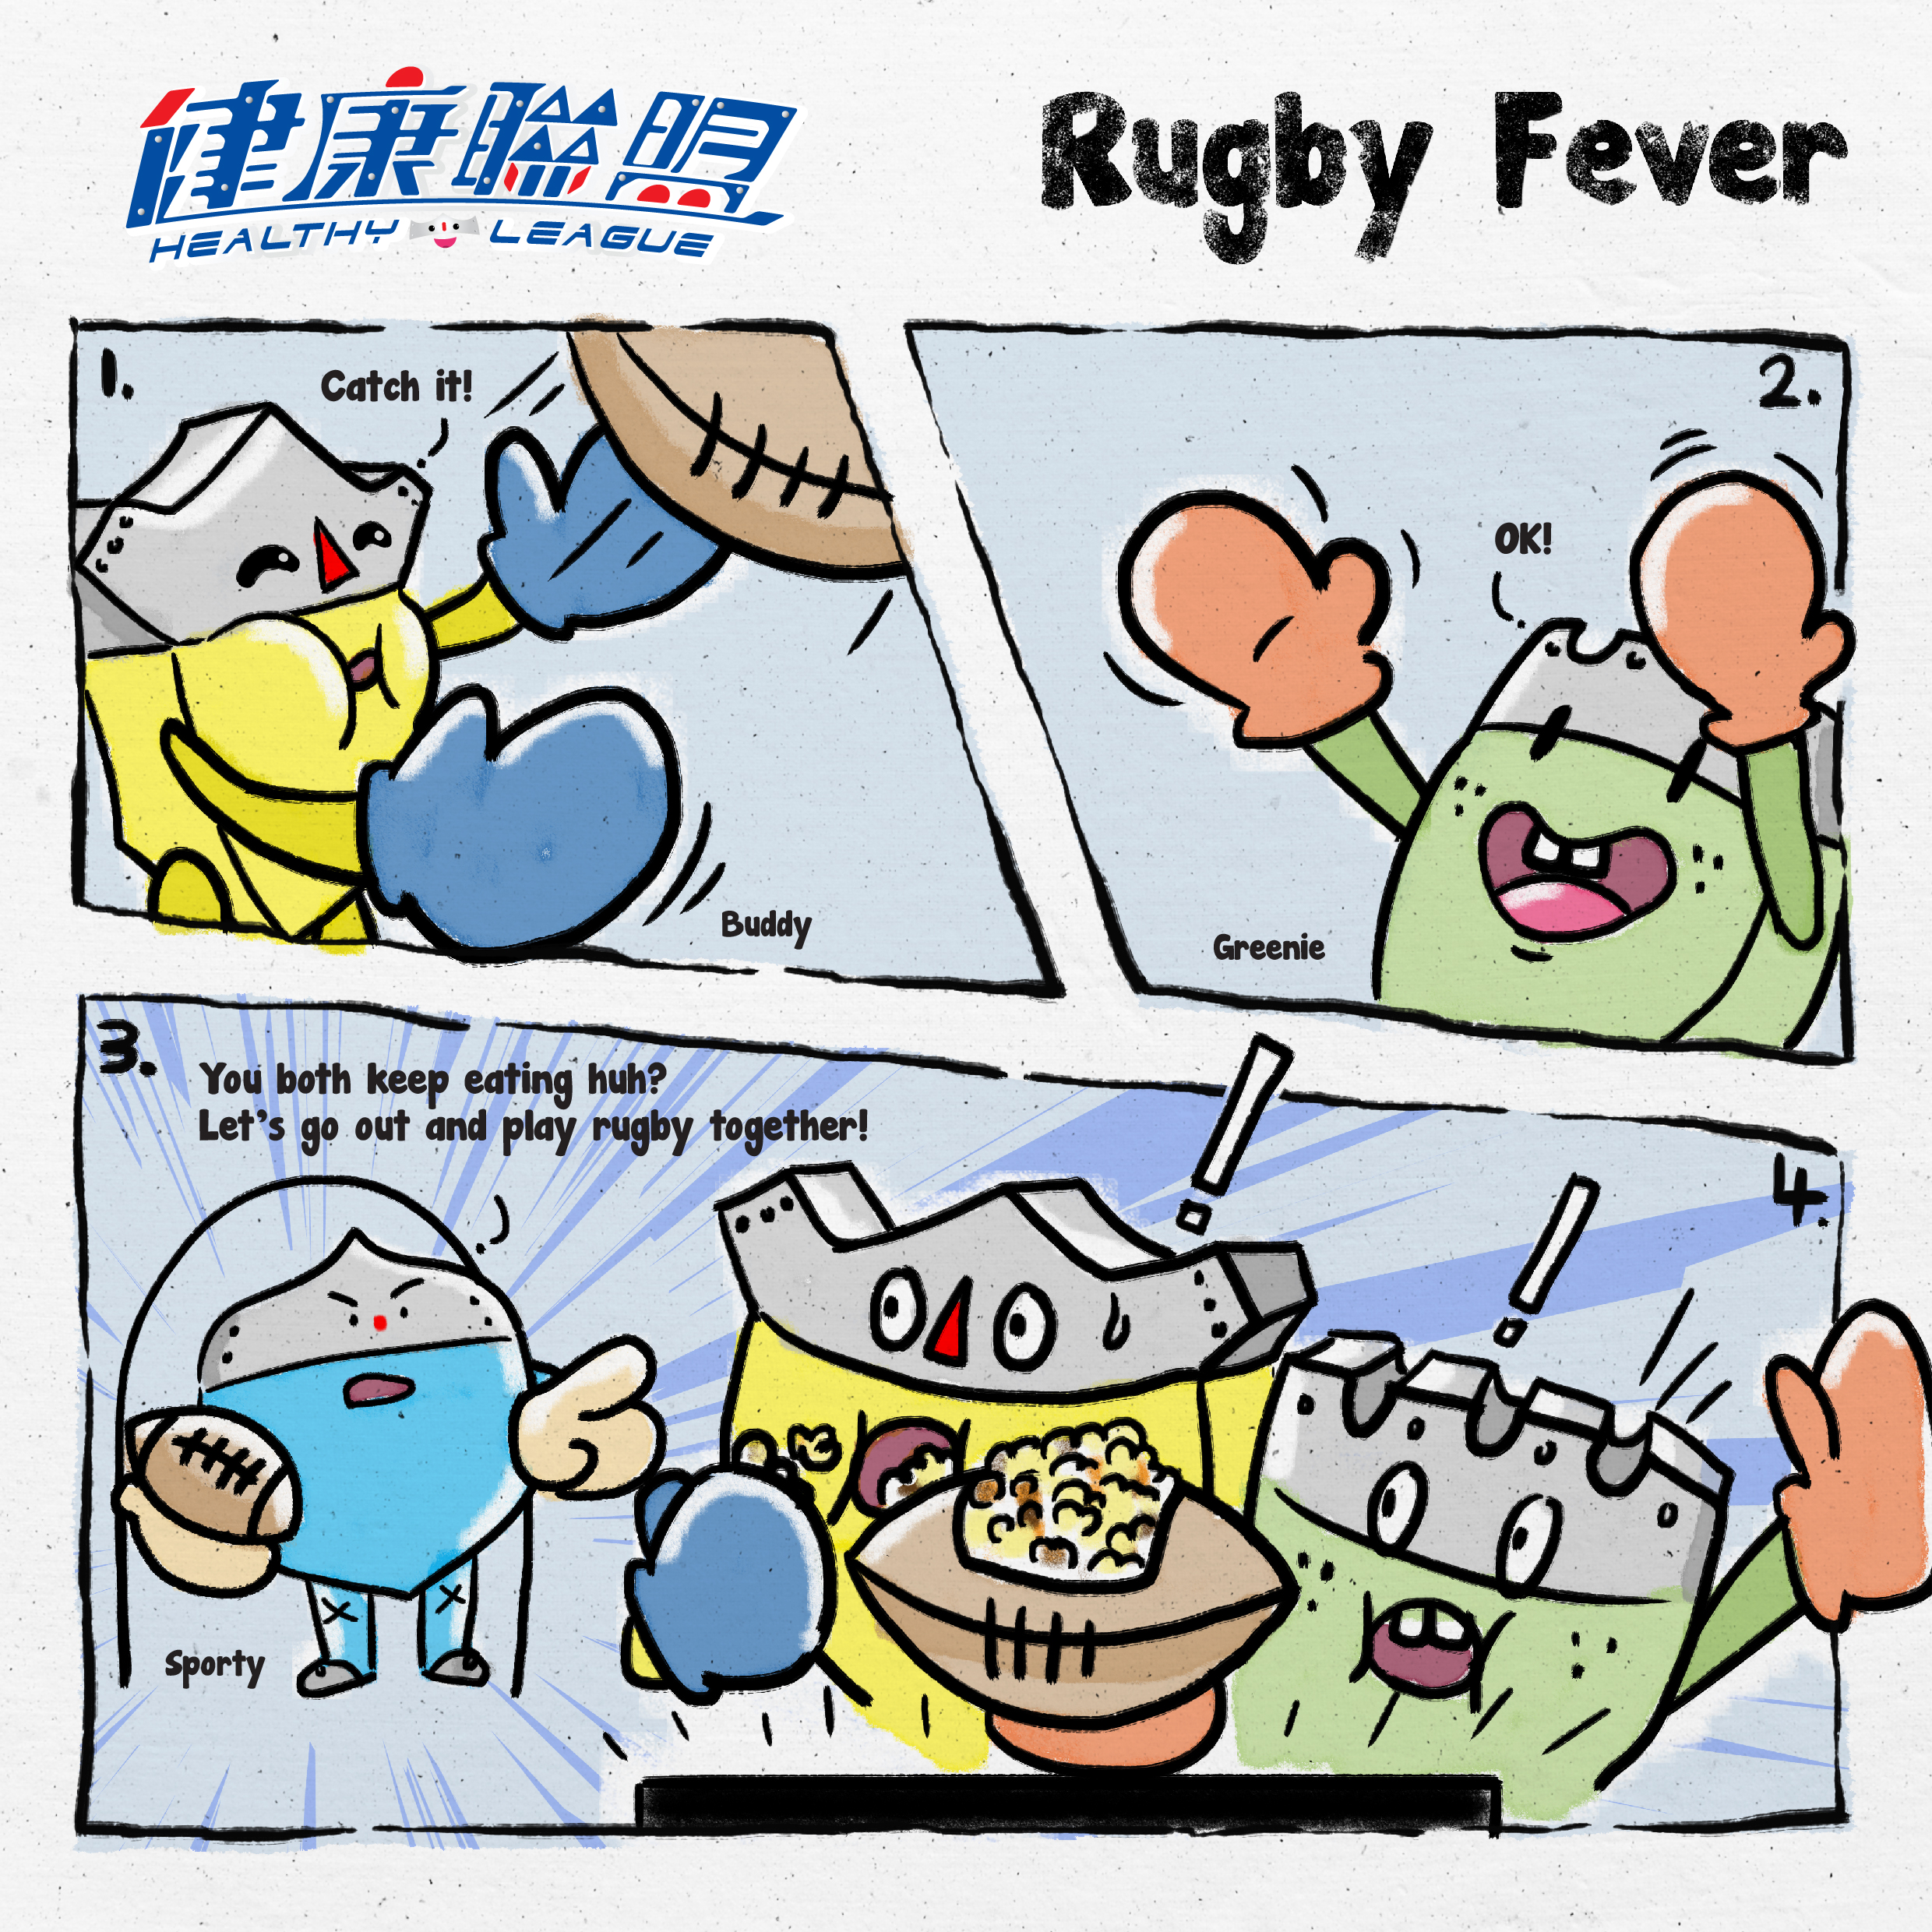 RUGBY FEVER